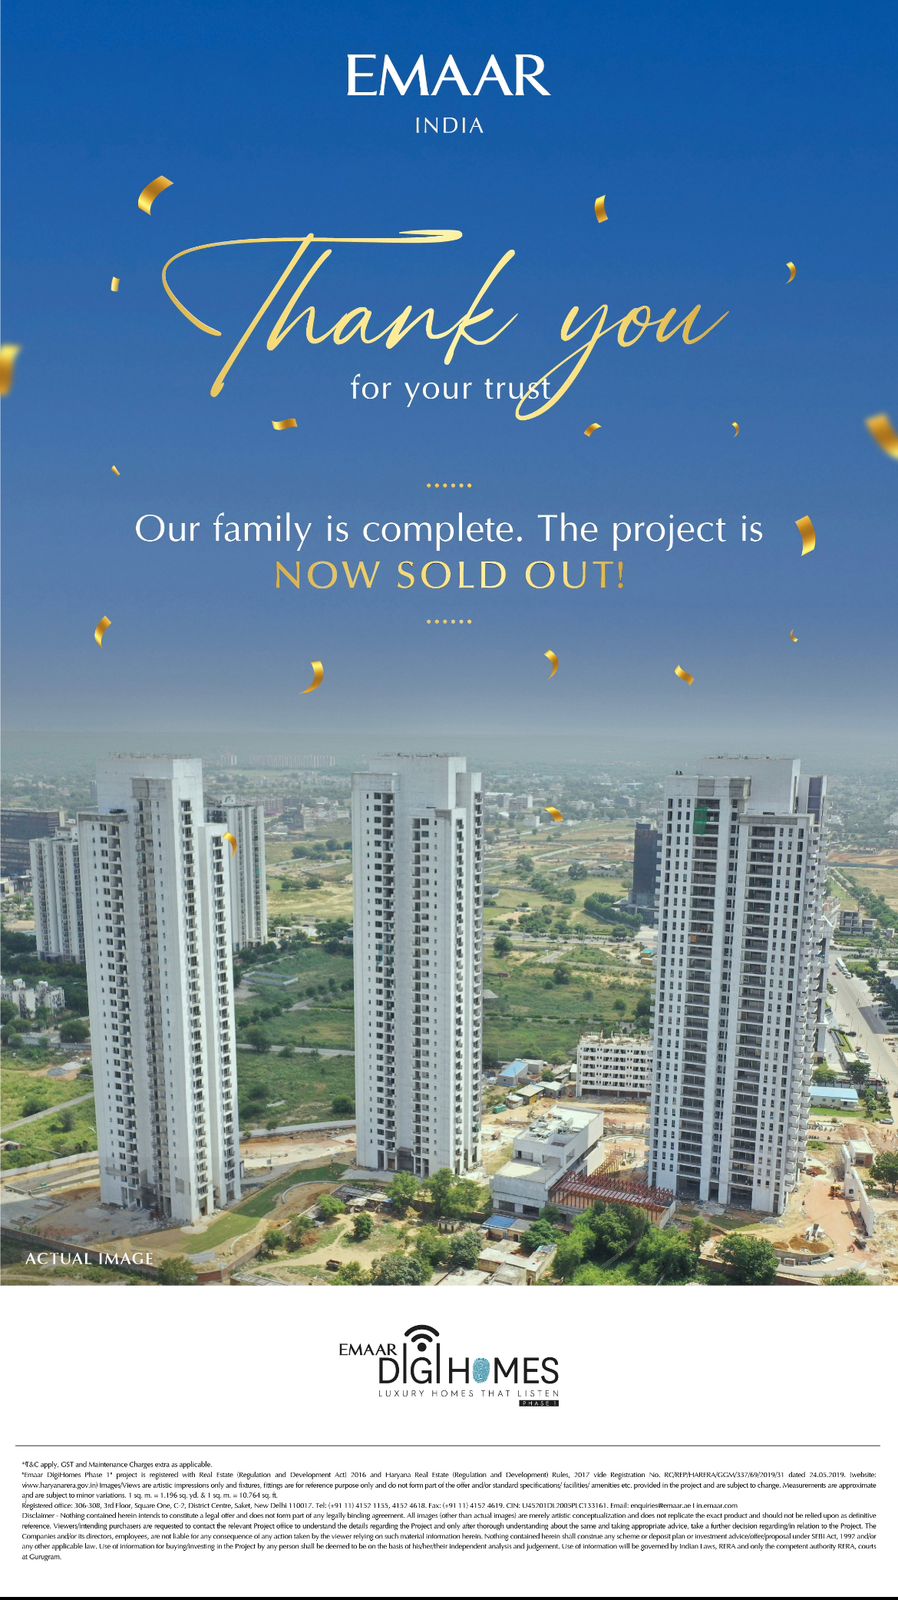 Now sold out at Emaar Digi Homes in Sector 62, Gurgaon